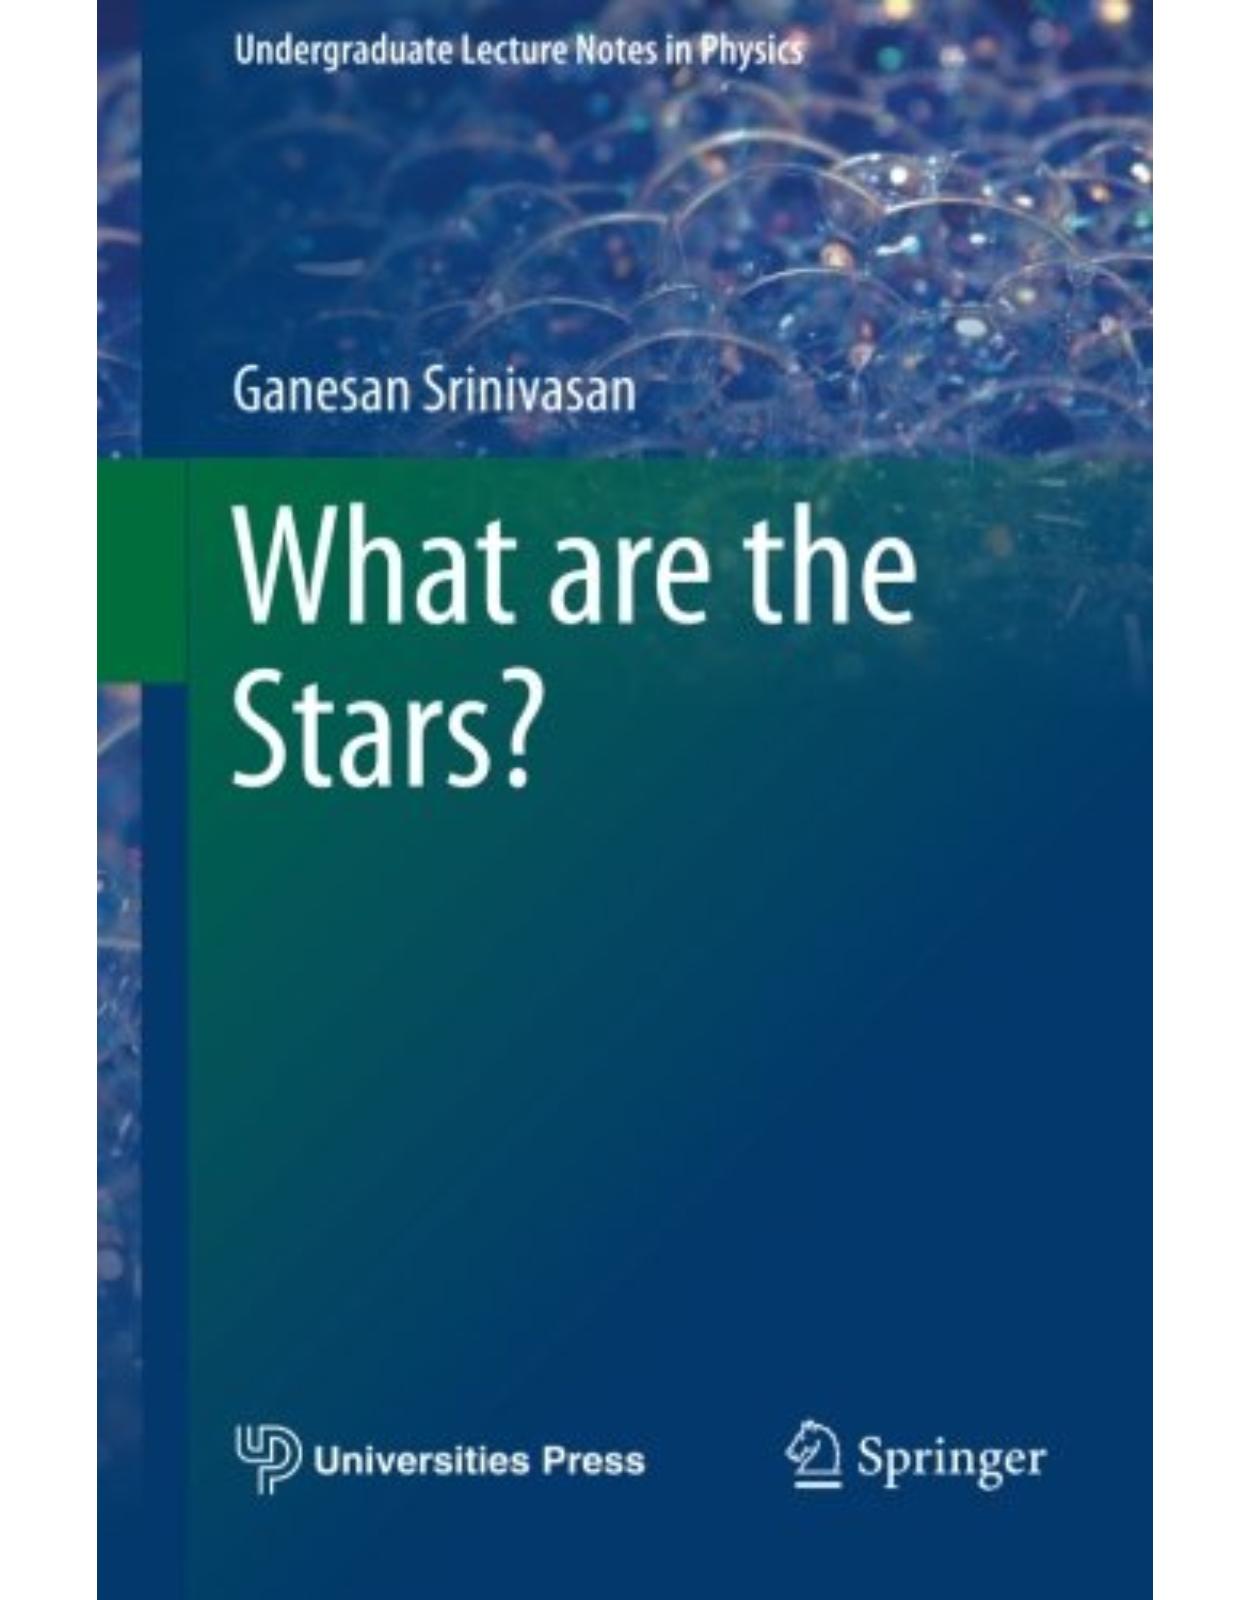 What are the Stars?